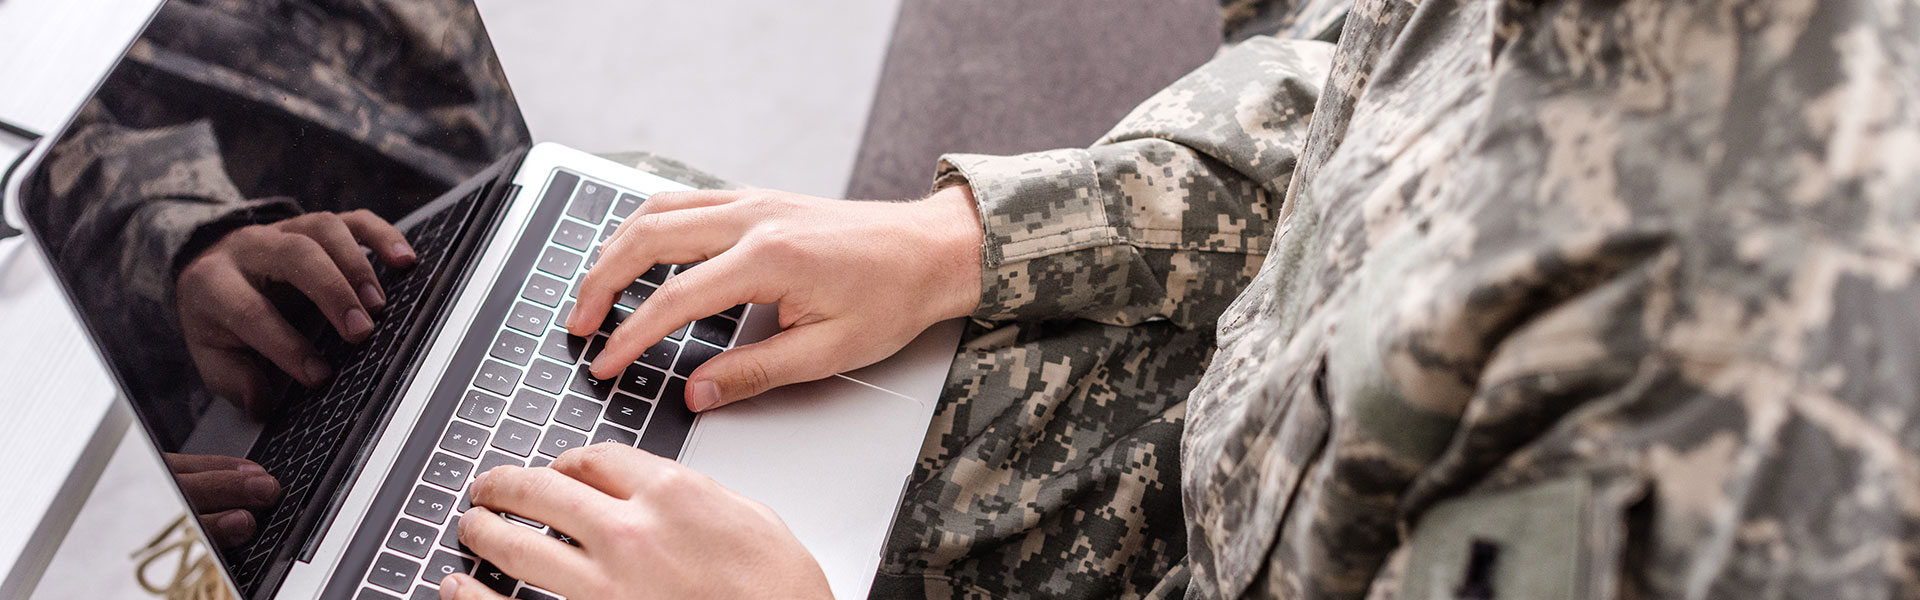 A person in military fatigues typing on a laptop.